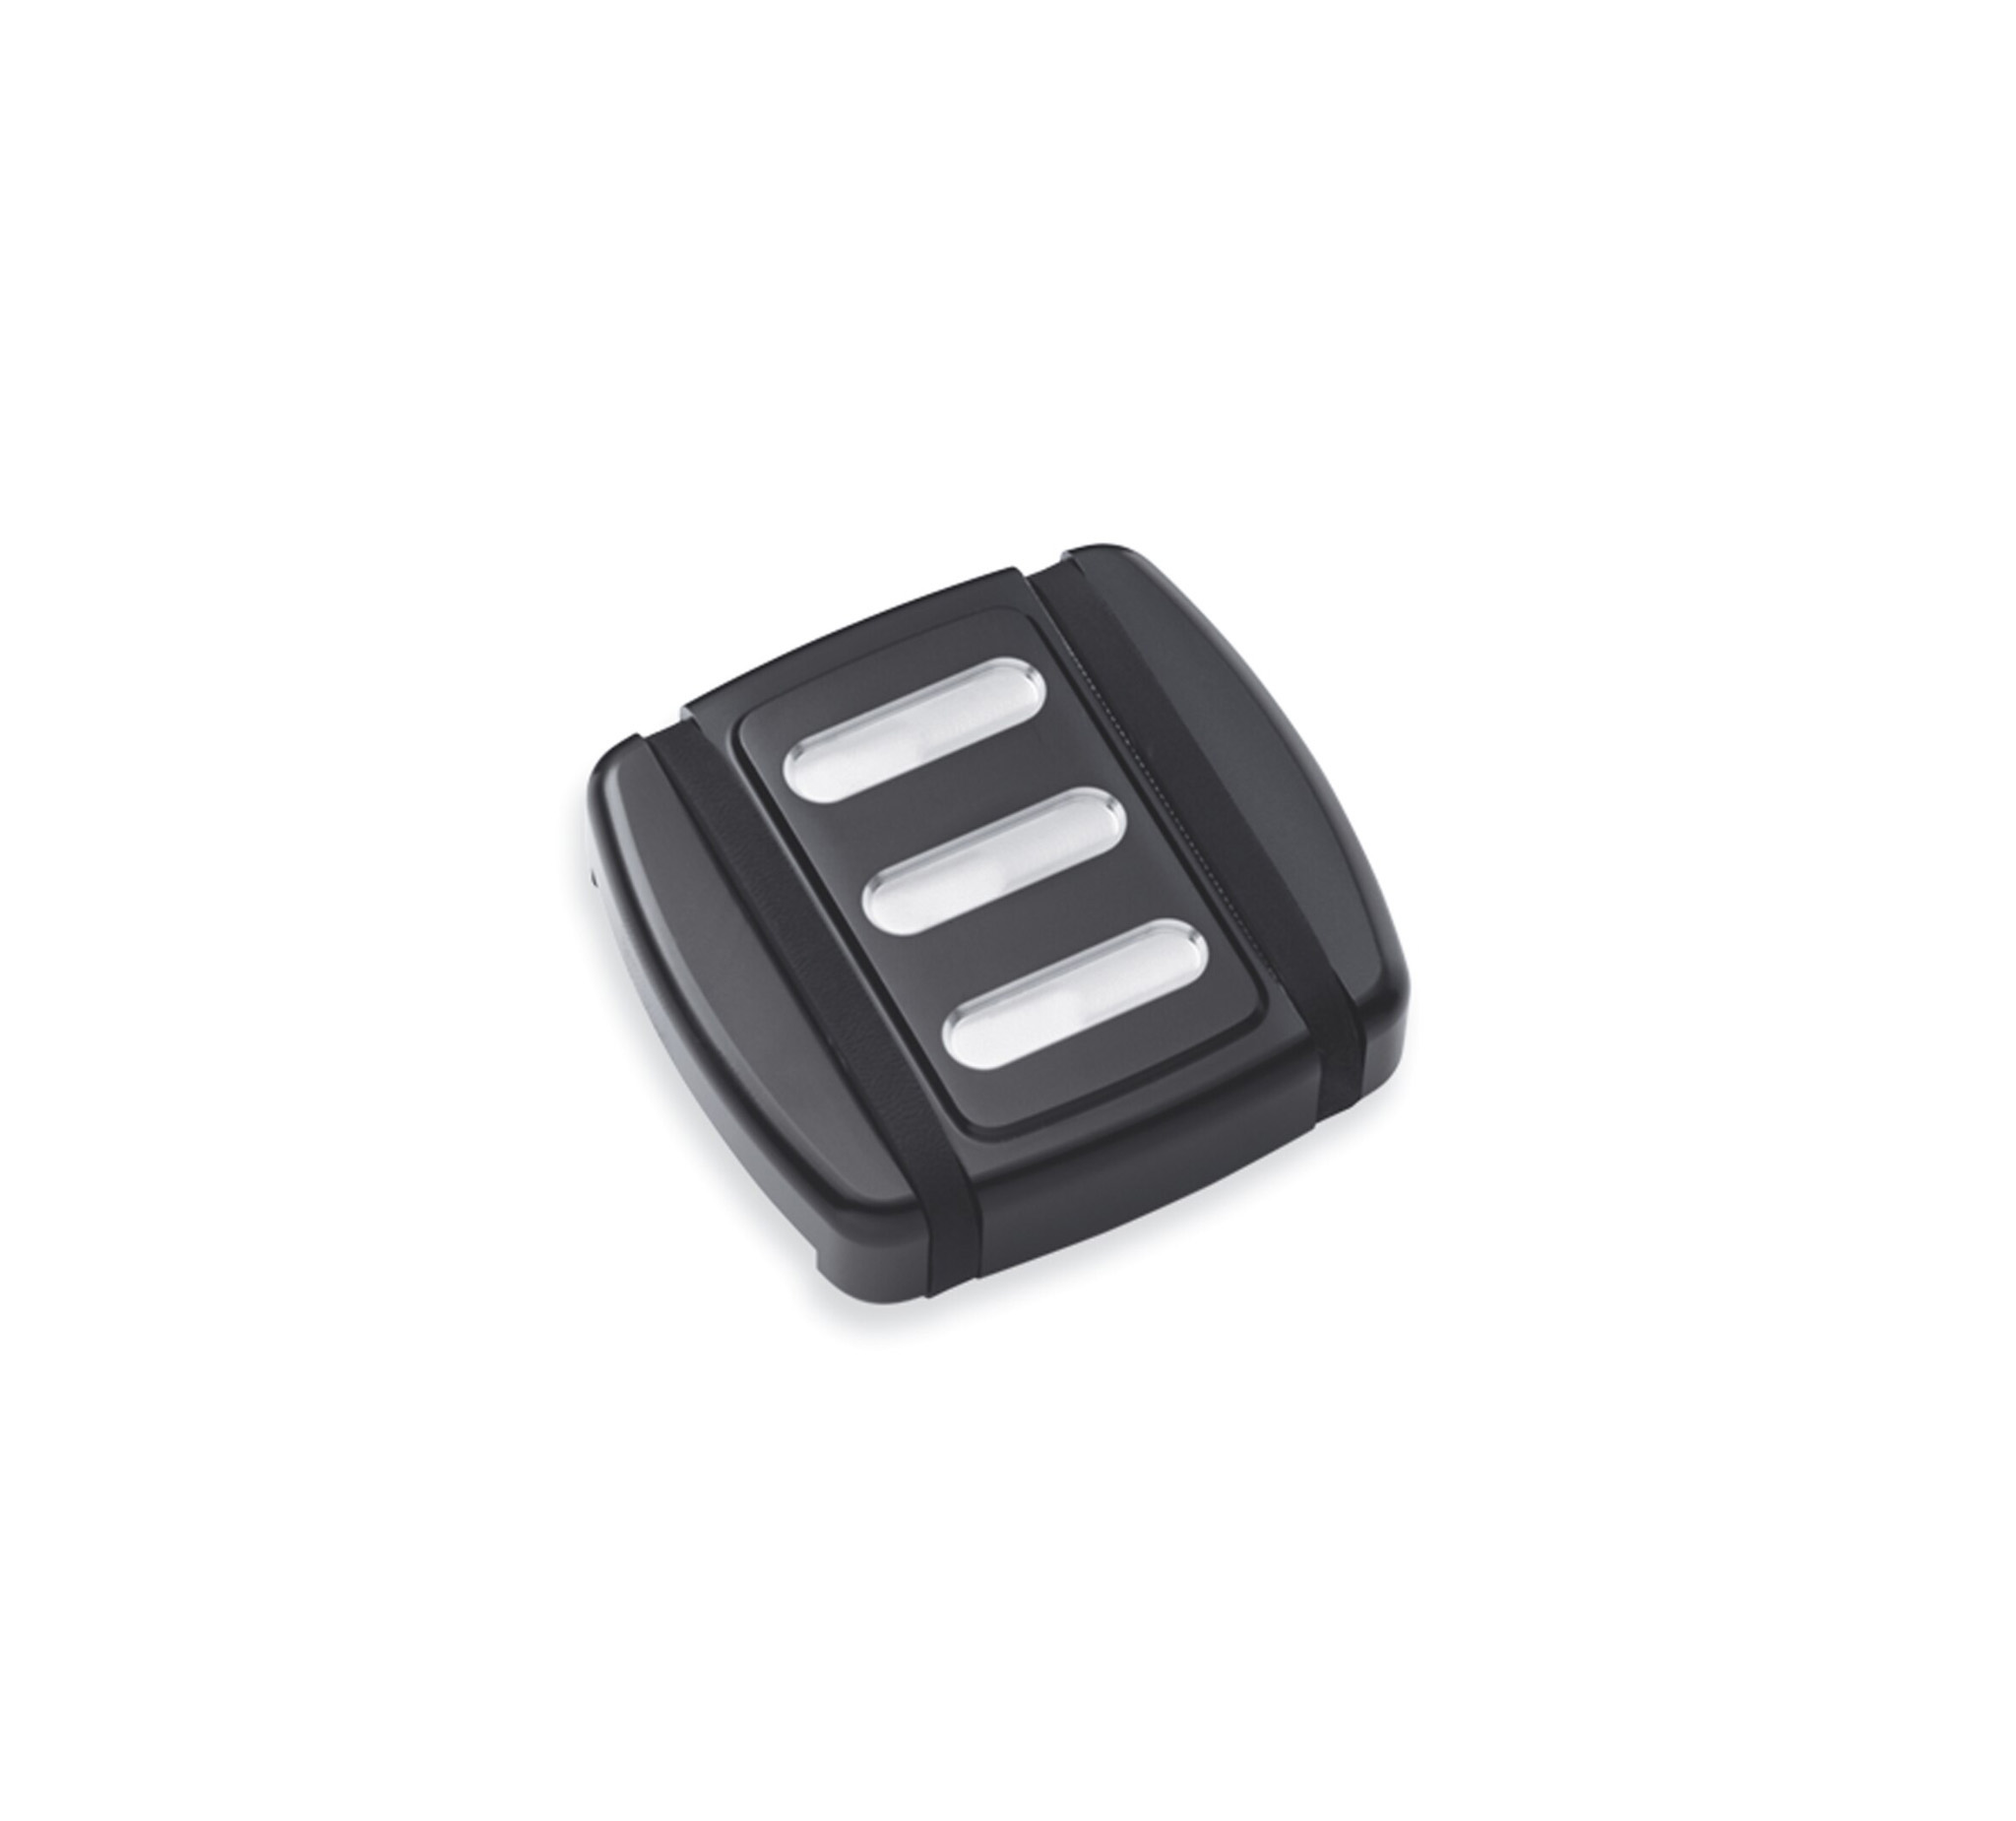 Contrast-Cut Brake Pedal Pad Cover For Harley Sportster XL883 XL1200